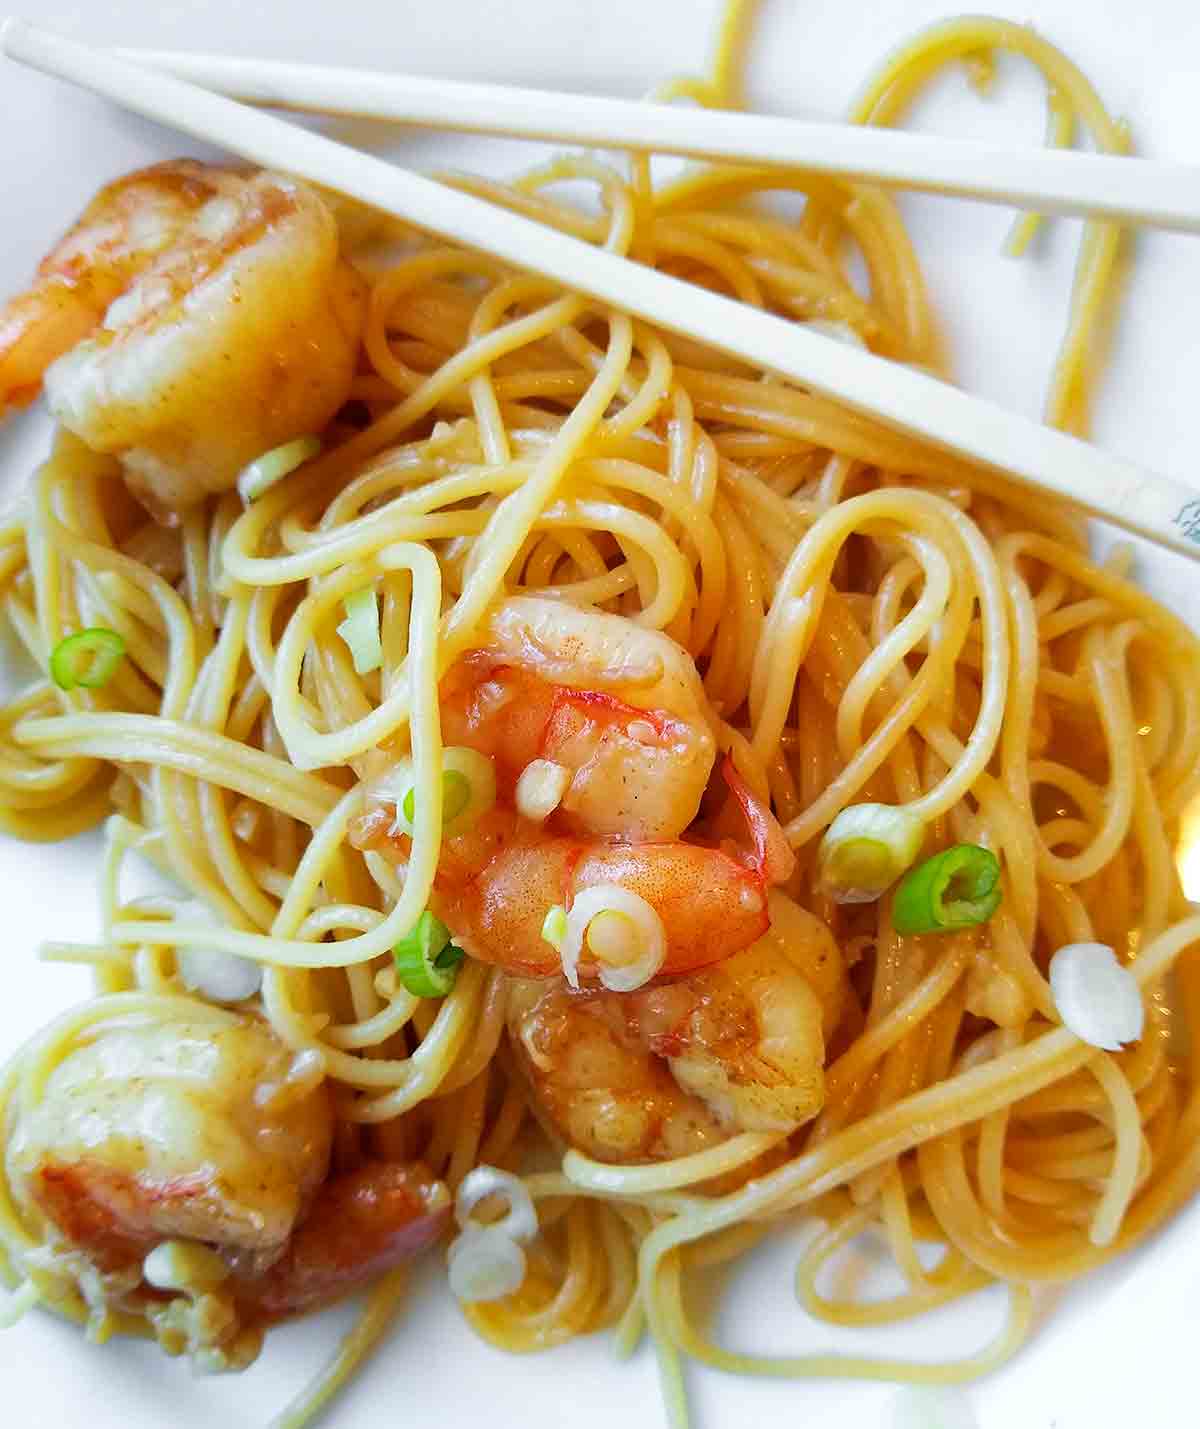 San Francisco-style Vietnamese garlic noodles with shrimp and scallions in a white bowl with chopsticks on the side.